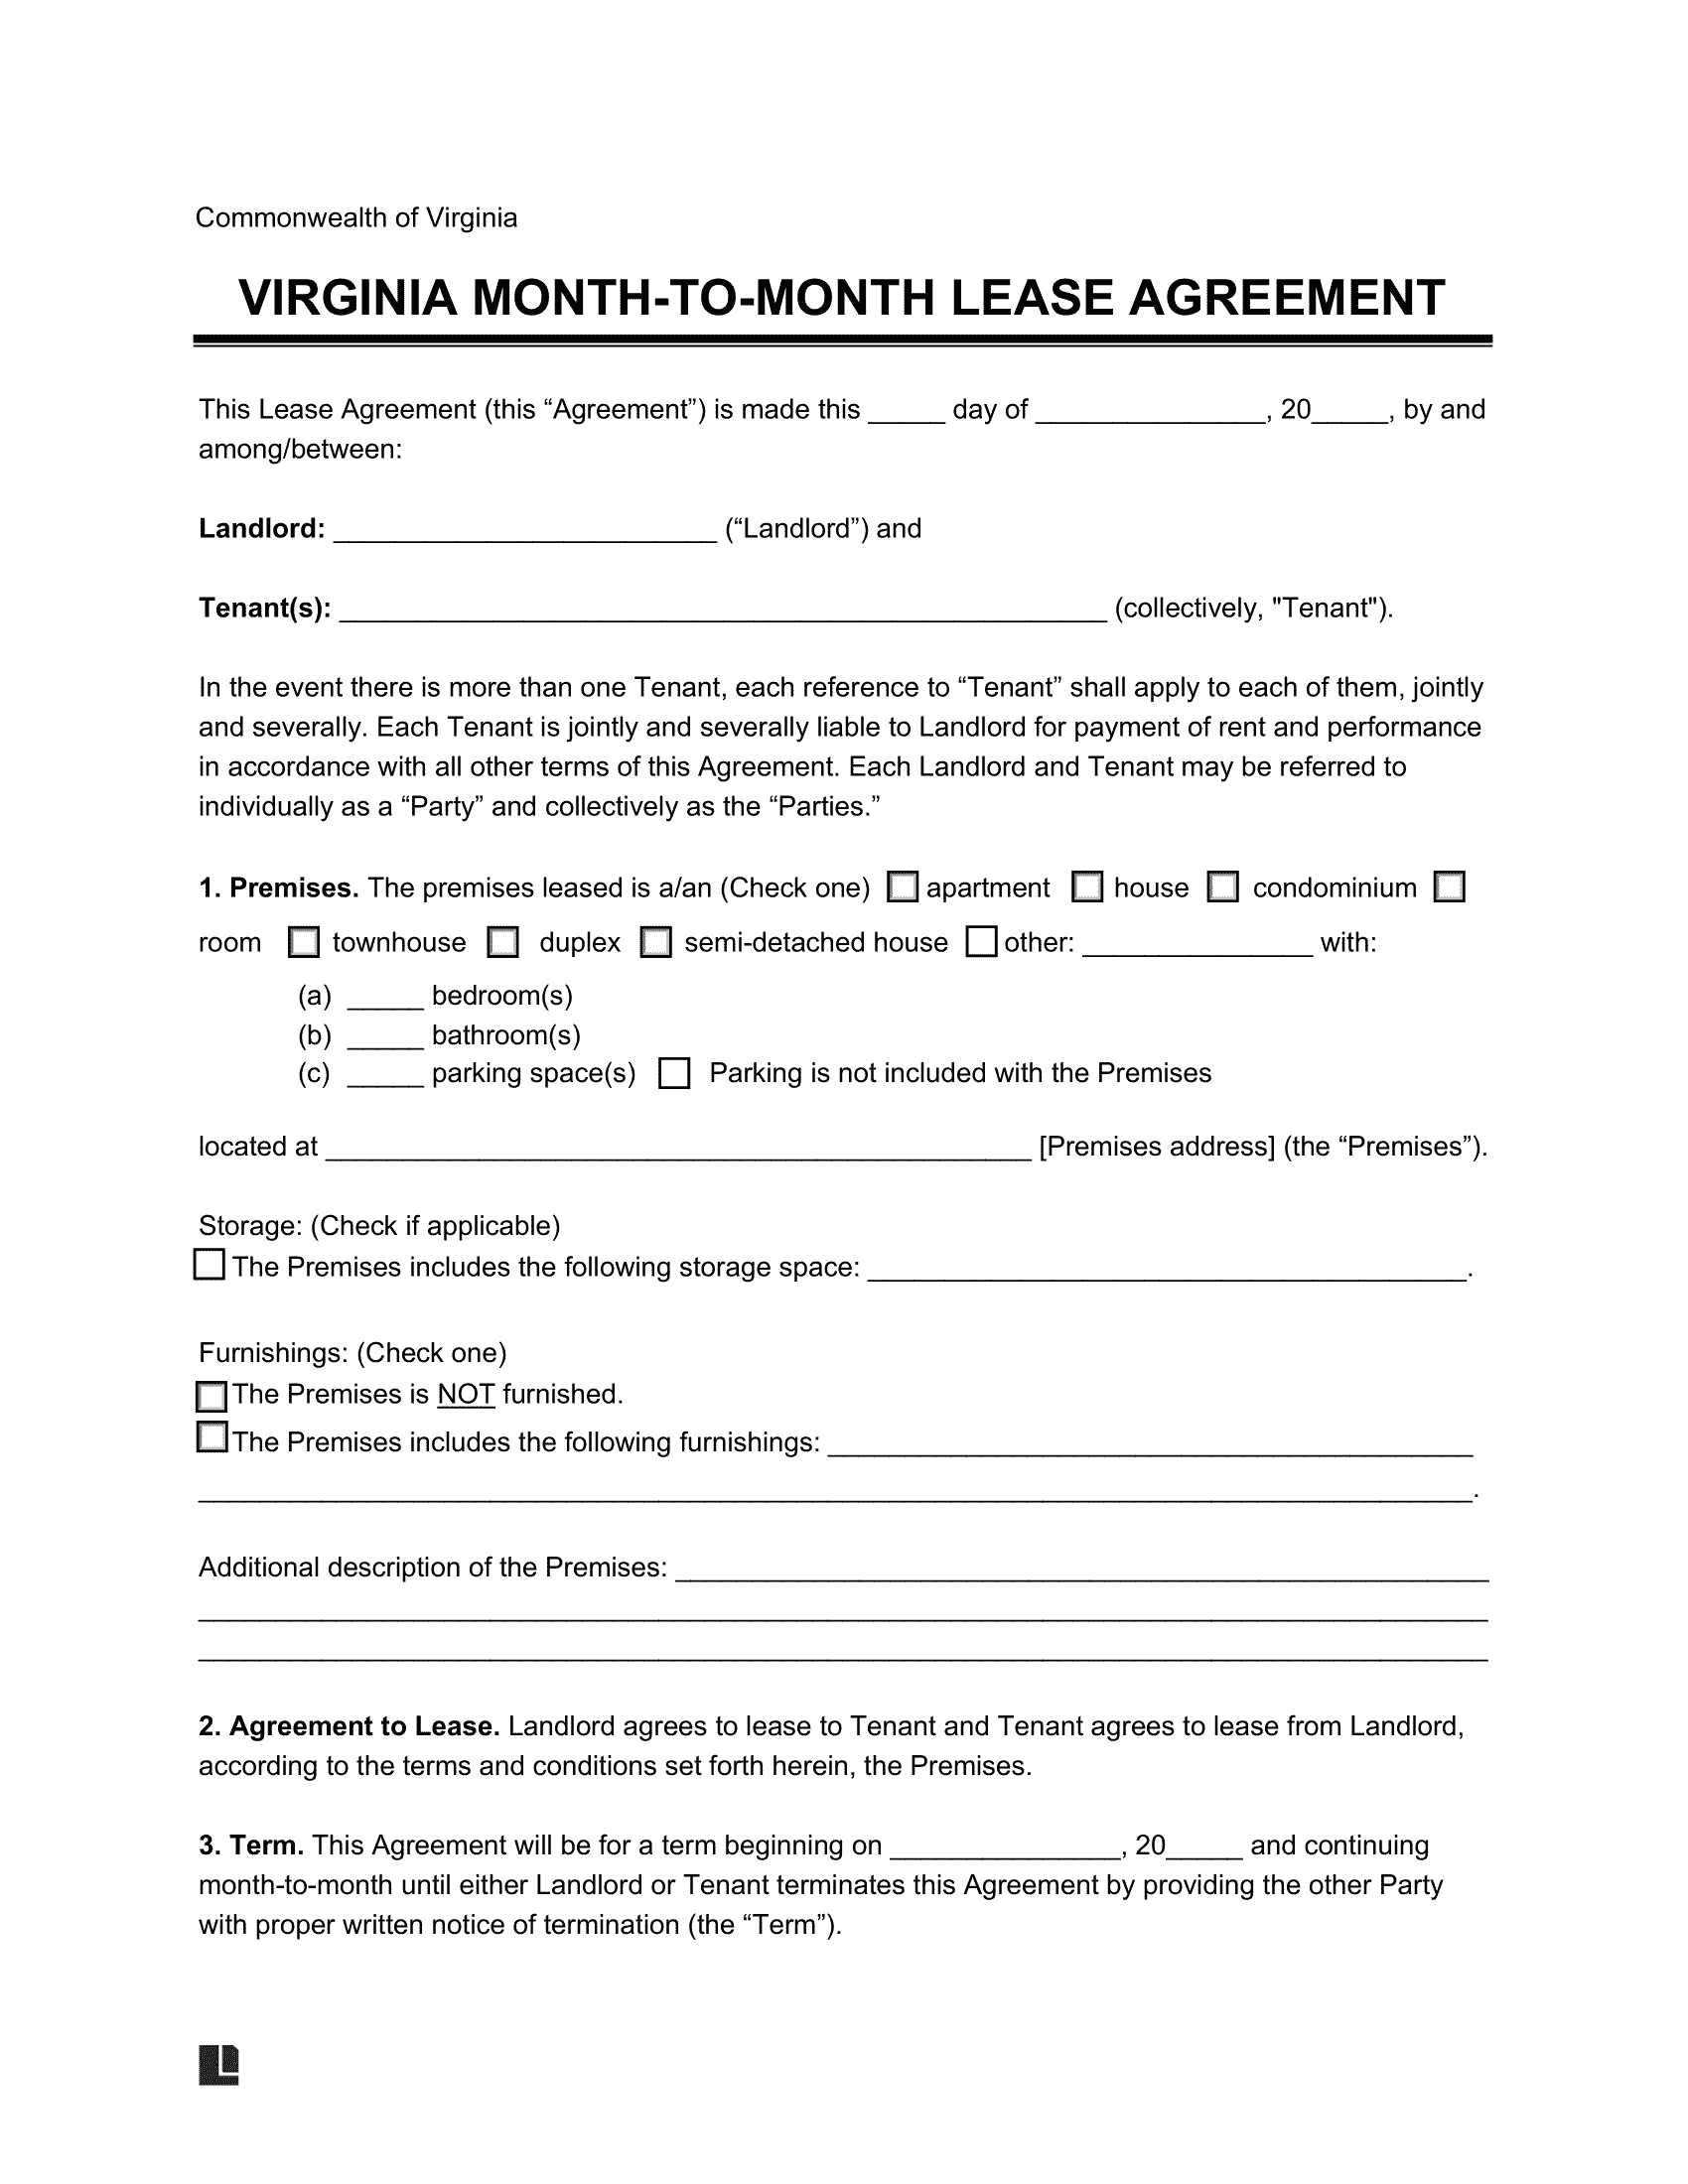 Virginia Month-to-Month Rental Agreement